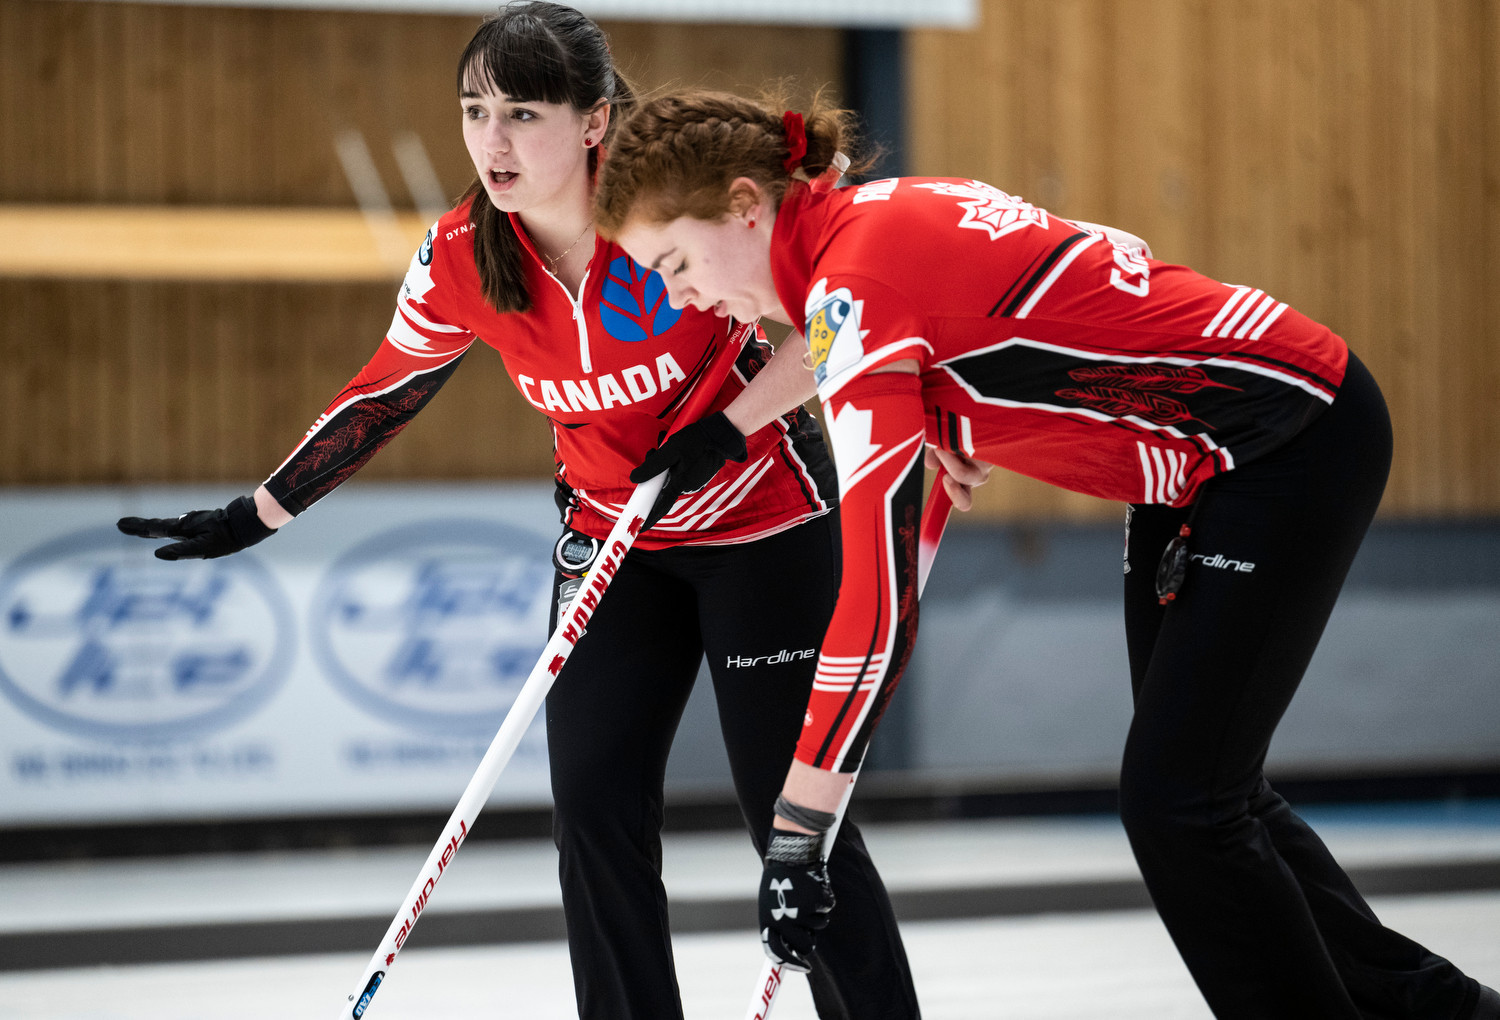 Canada lost all three round-robin matches across the men's and women's competitions as they began the defence of their World Junior Curling Championships titles ©World Curling Federation